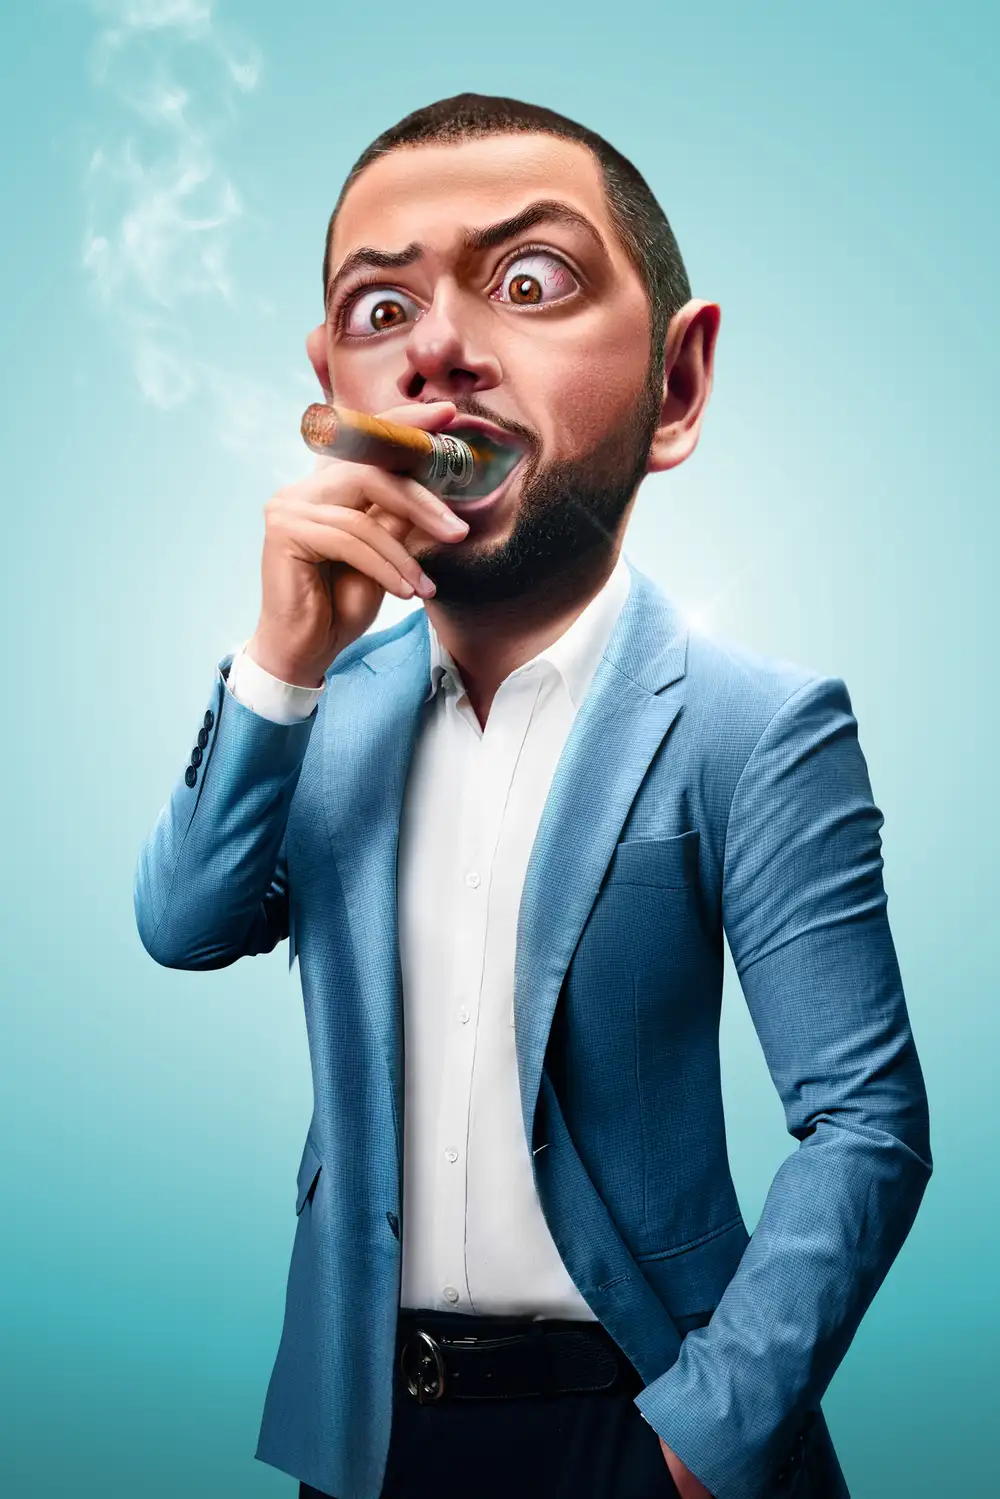 Creative Headshot Example. A cartoon style man wearing a blue suit with a cigar in his mouth.